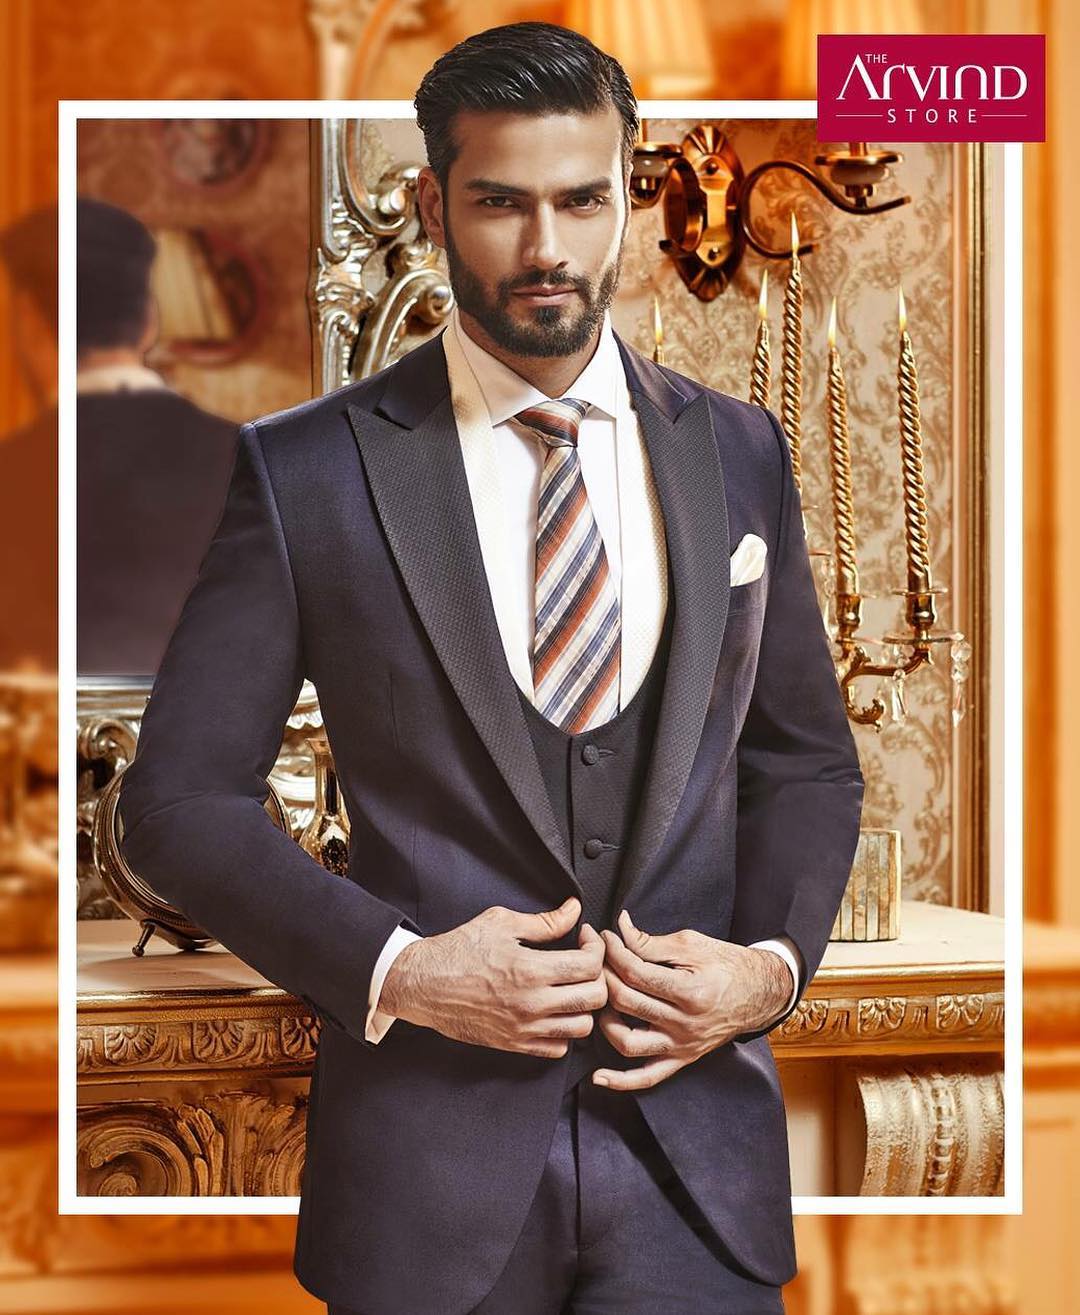 Adorn the premium suits that are handcrafted to perfection. Experience the celebratory fashion retreat at #TheArvindStore. Book your appointment today - Link in Bio

#designerwear #menswear #celebrationwear #weddingwear #suits #royal #weddingsuits #bestdressed #menswear #handcrafted #accessories #style #mensfashion #menwithstyle